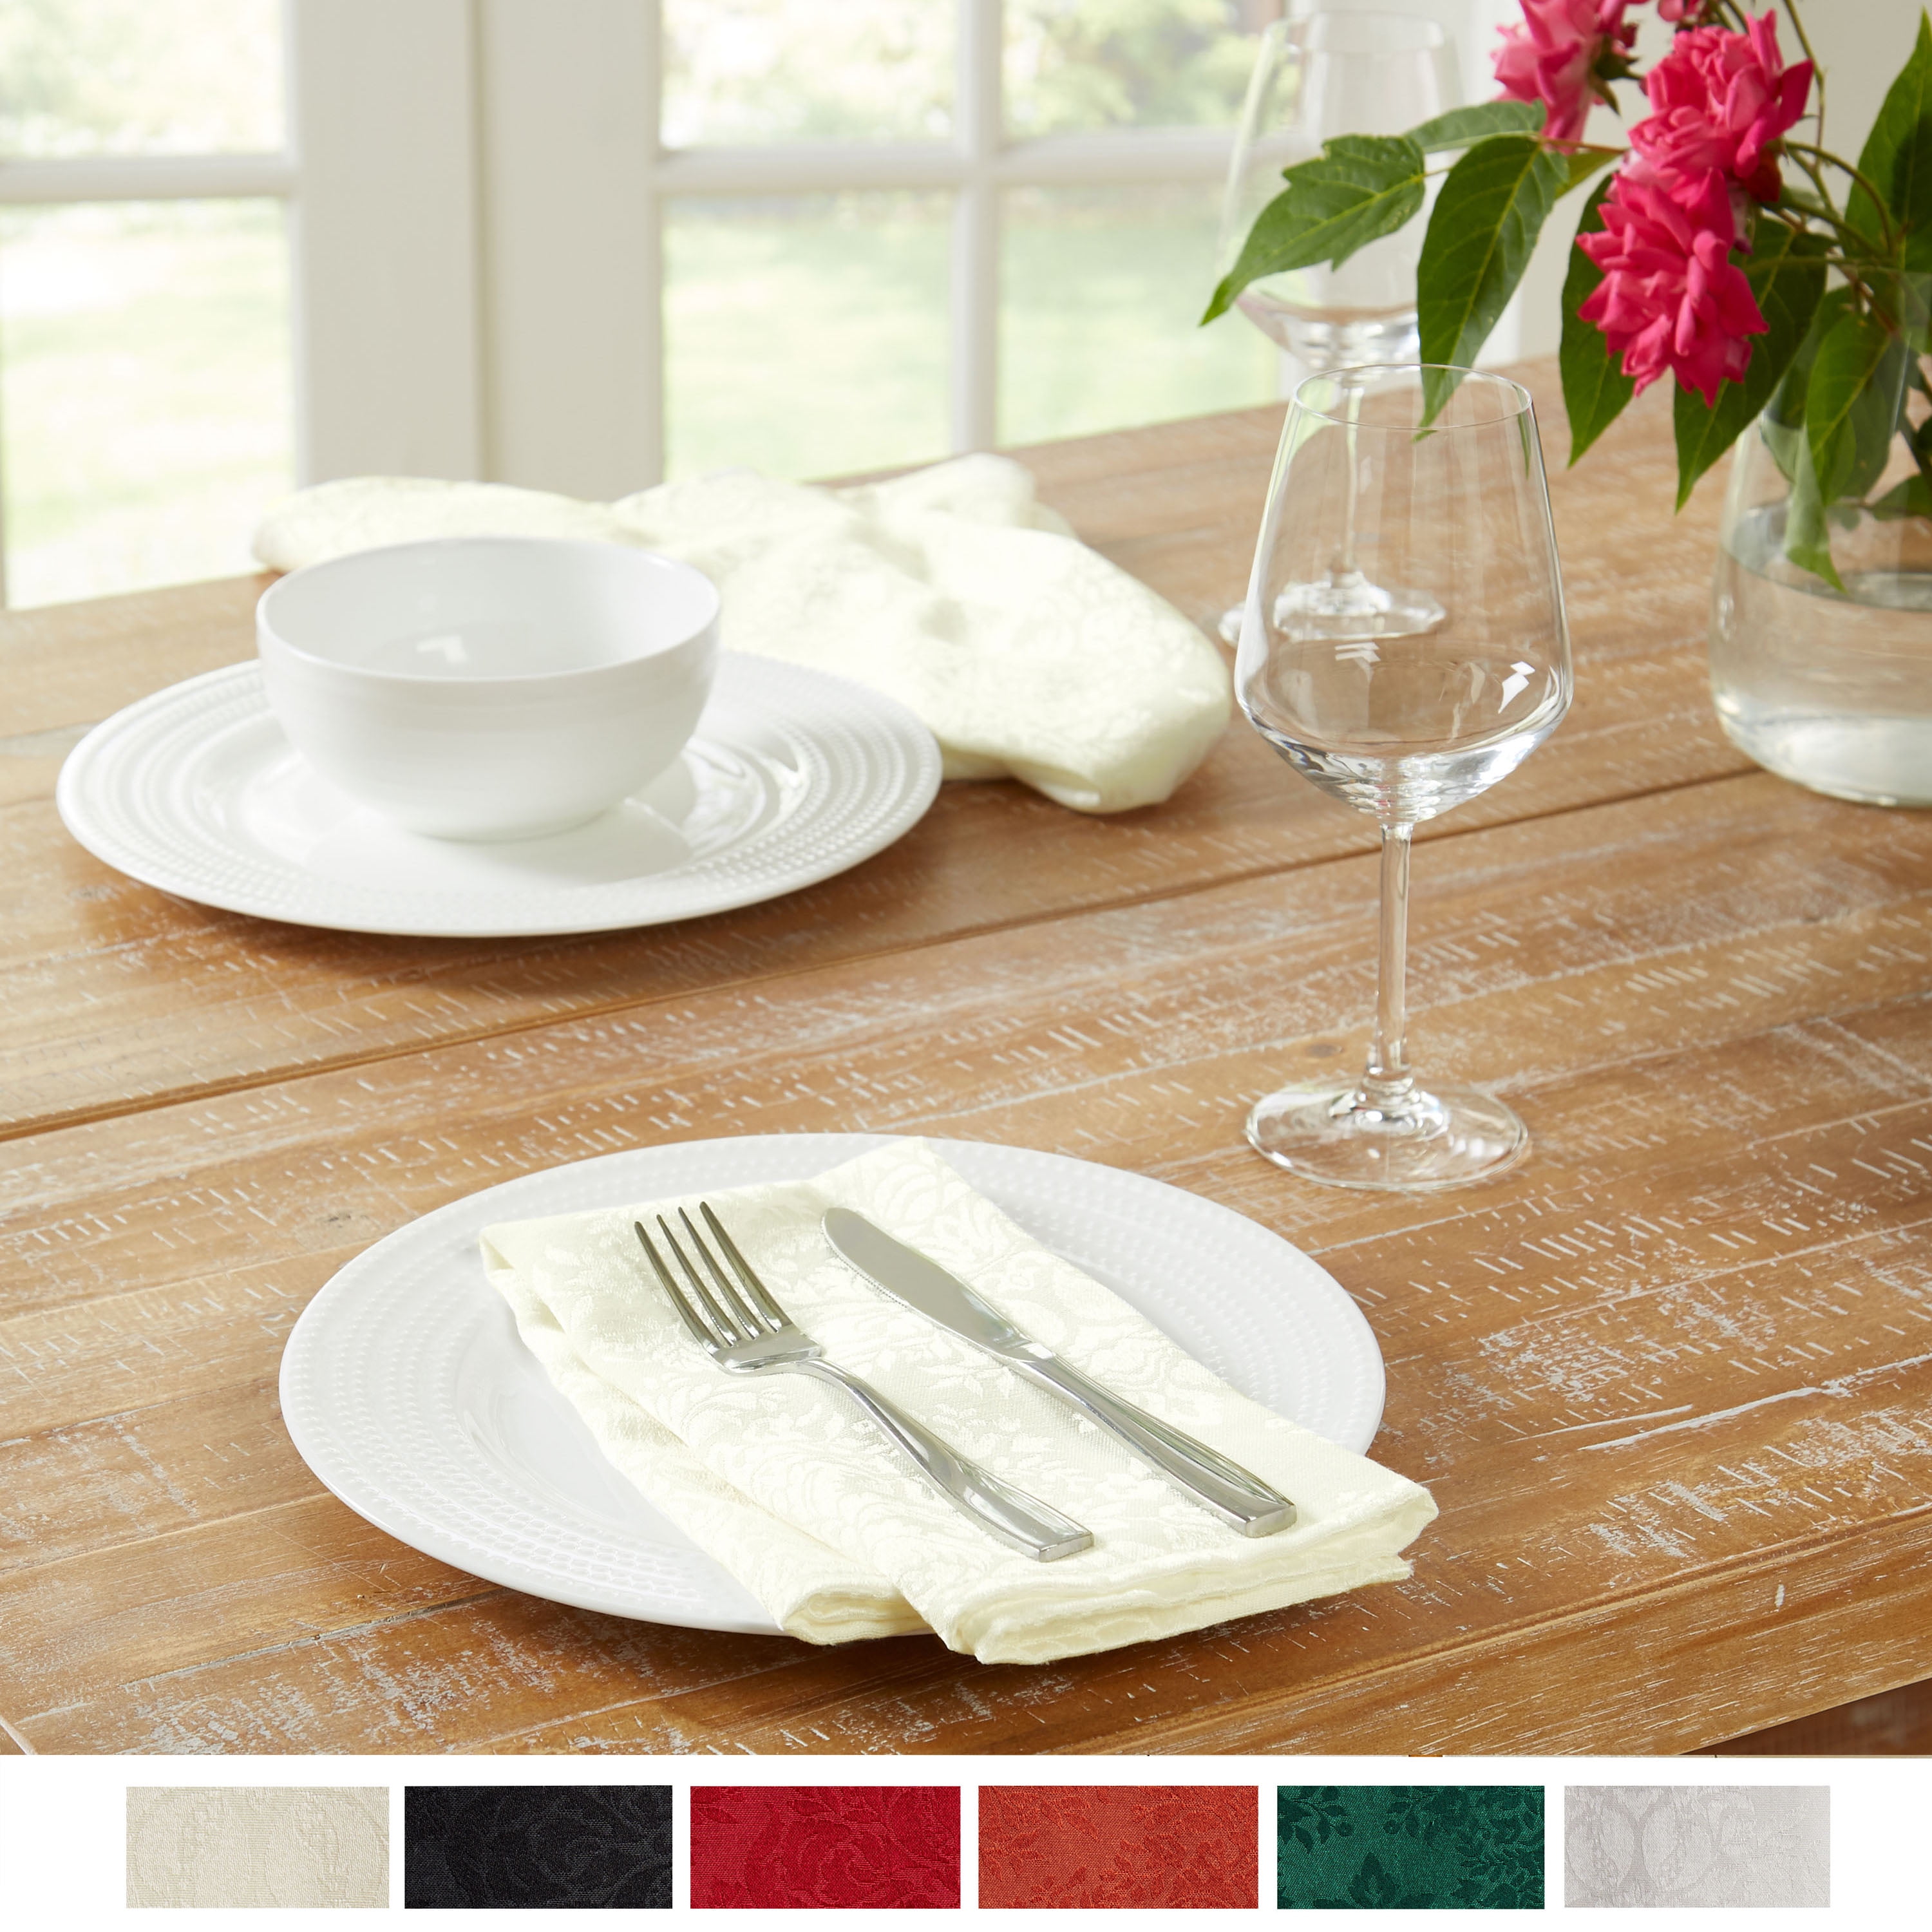 Southern Living LinenCotton Placemats Set of 4 - Natural